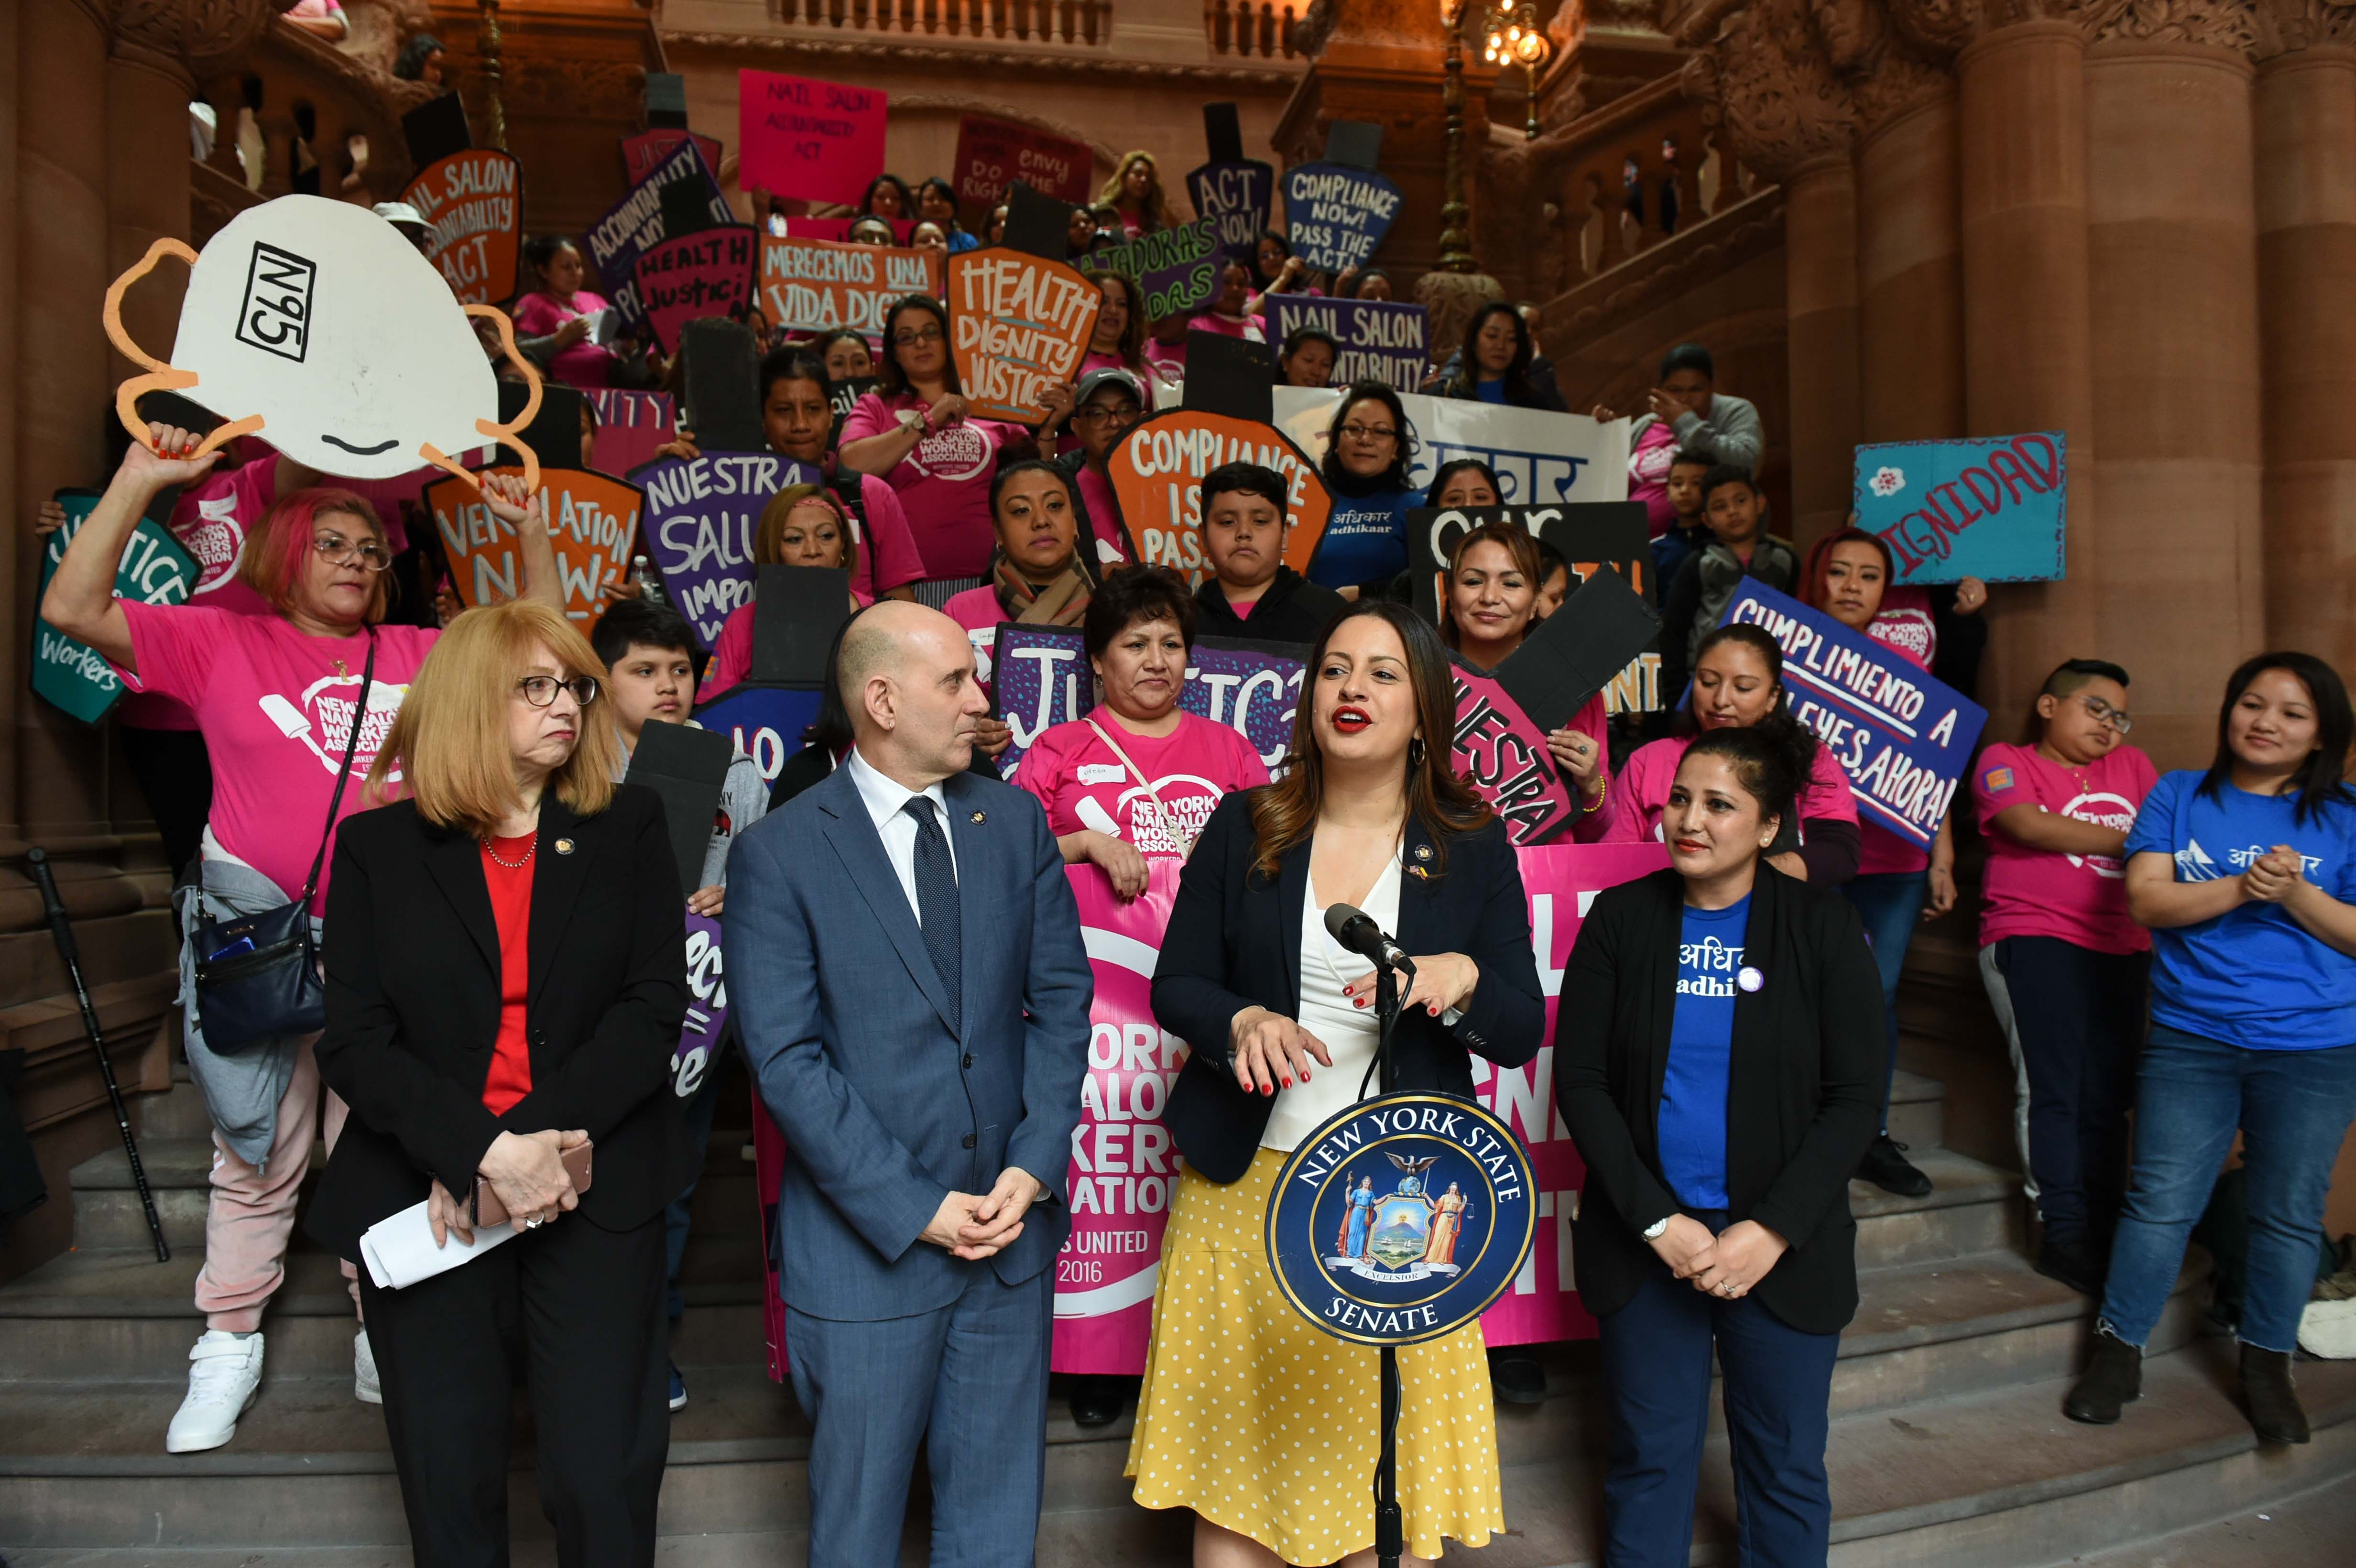 Assemblywoman Cruz stands in solidarity with nail salon workers.